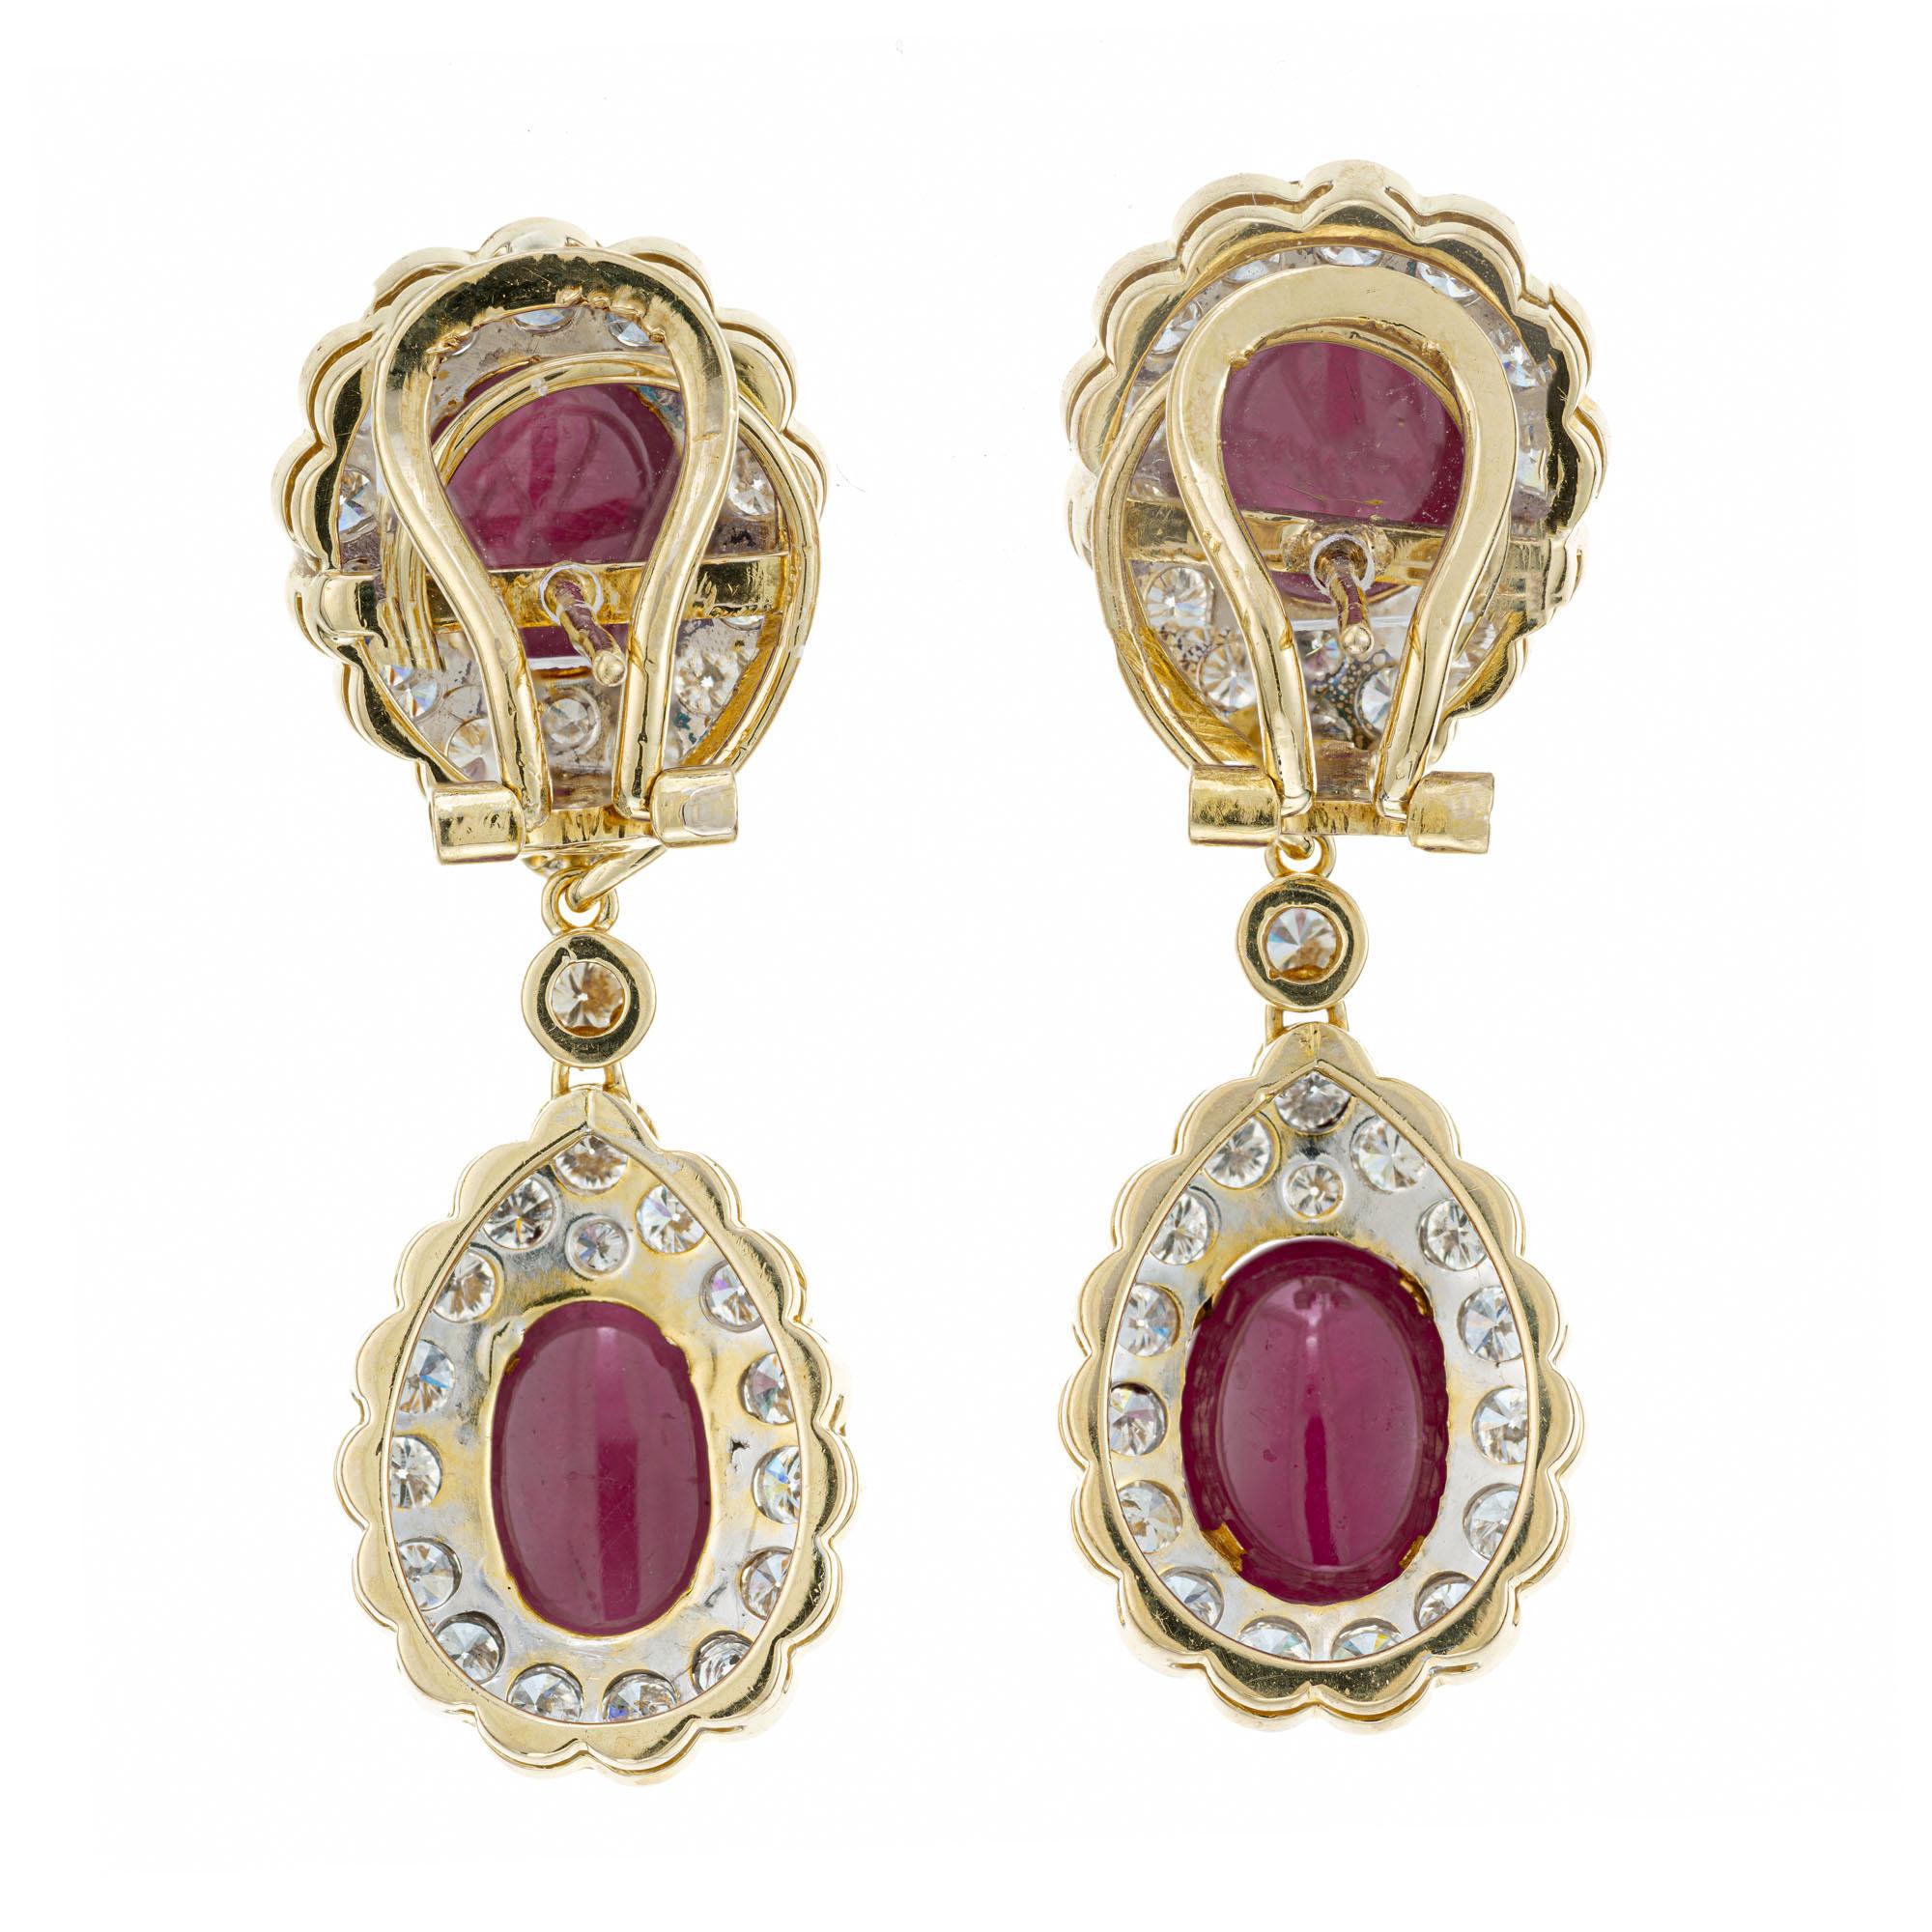 1980's Ruby and diamond day and night earrings. 4 GIA certified cabochon oval rubies with diamond halos, set in 18k yellow gold settings. 14.00 carats of bright red untreated natural no heat cabochon rubies and 3.75 carats of full cut diamonds. The